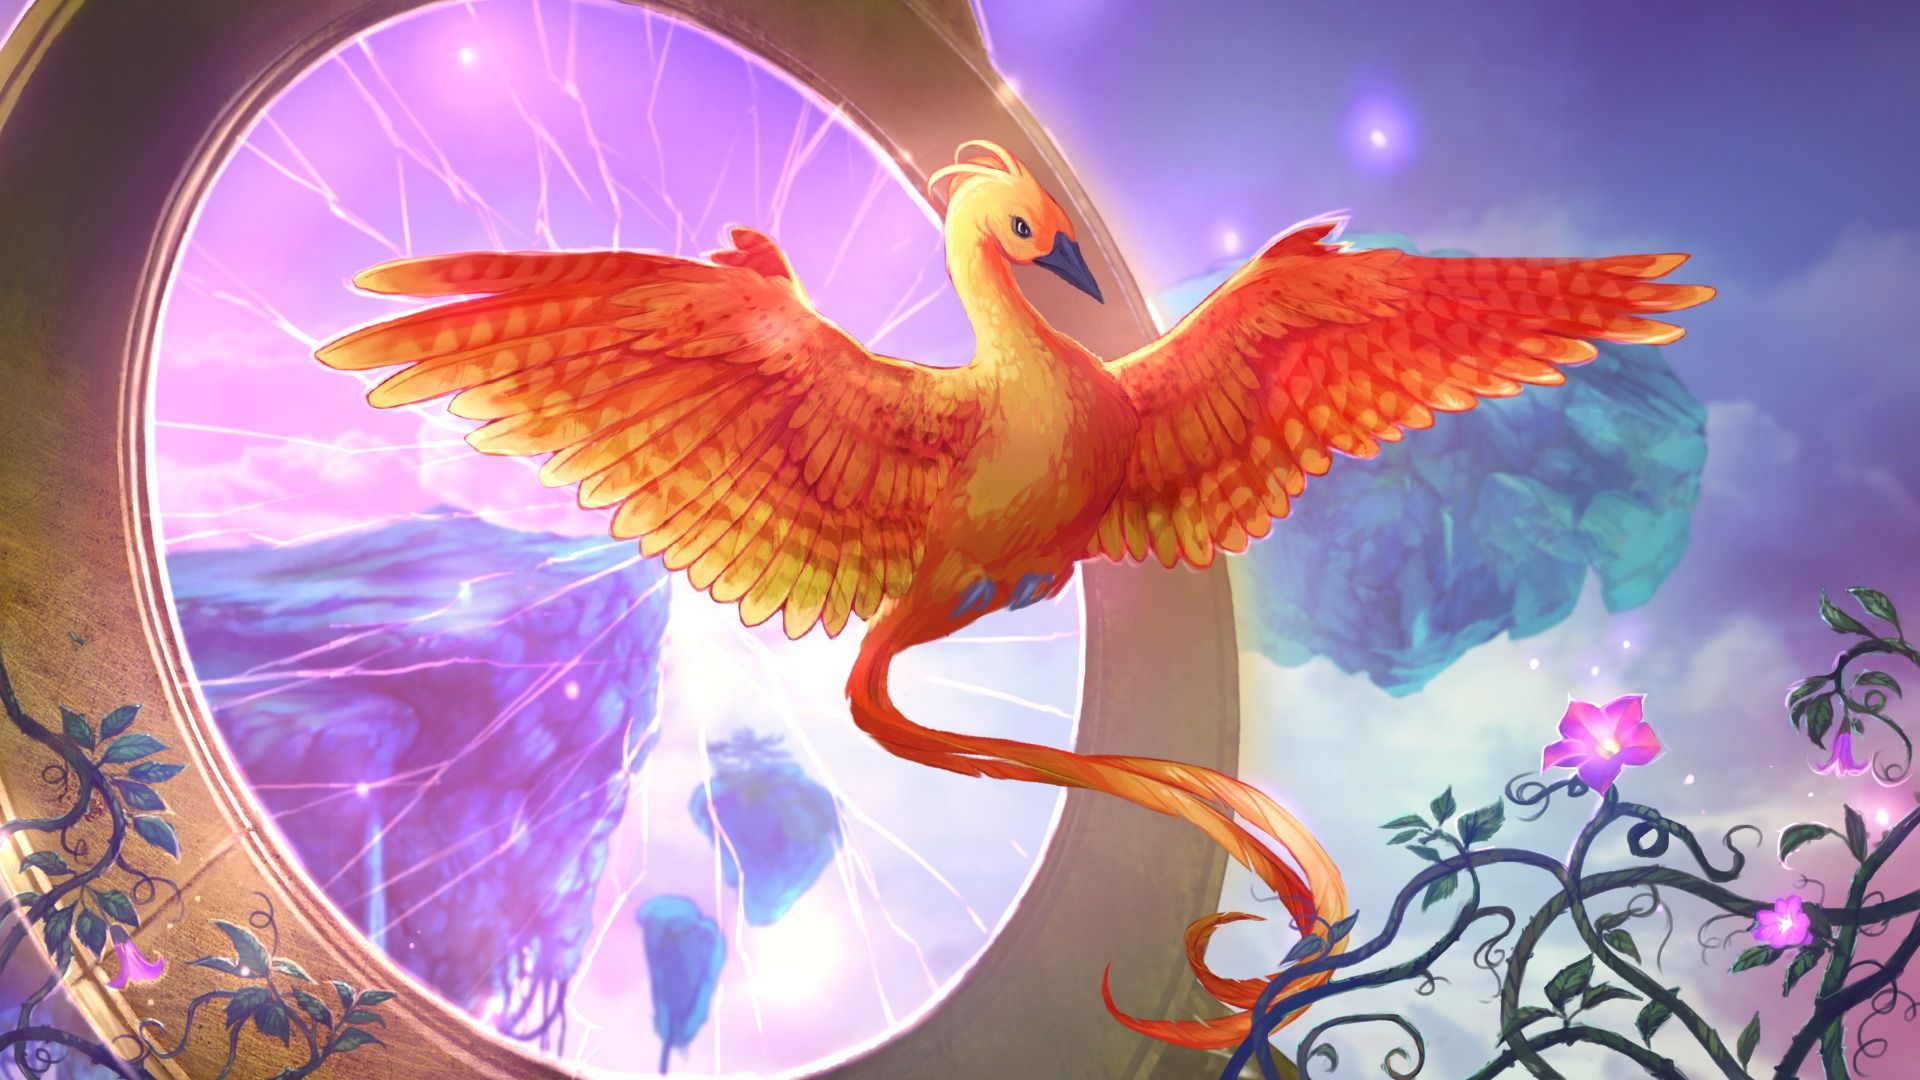 The Phoenix from Mythic Wonders: The Philosopher's Stone by Artifex Mundi